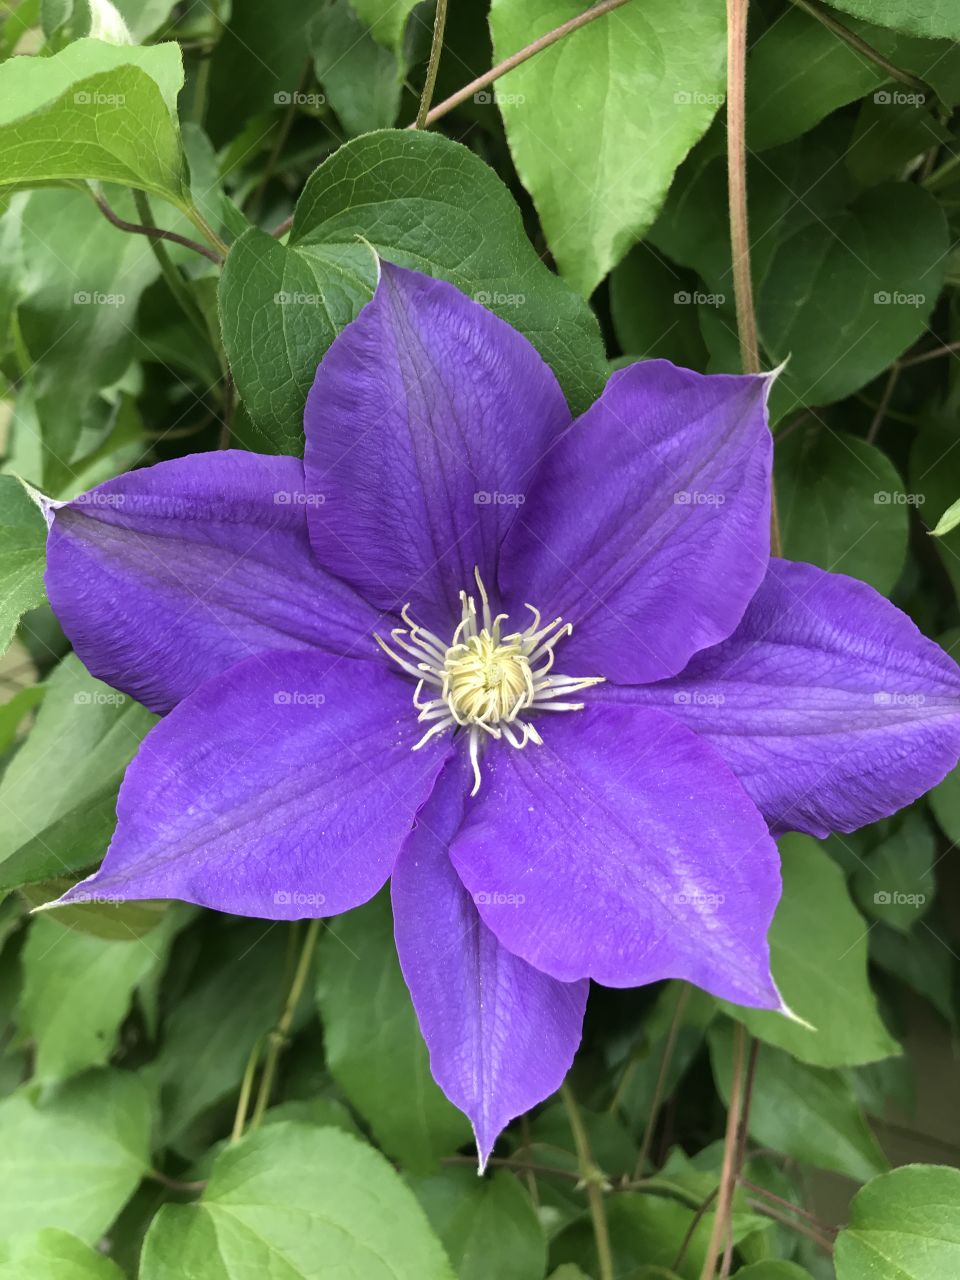 Beautiful clematis blossom